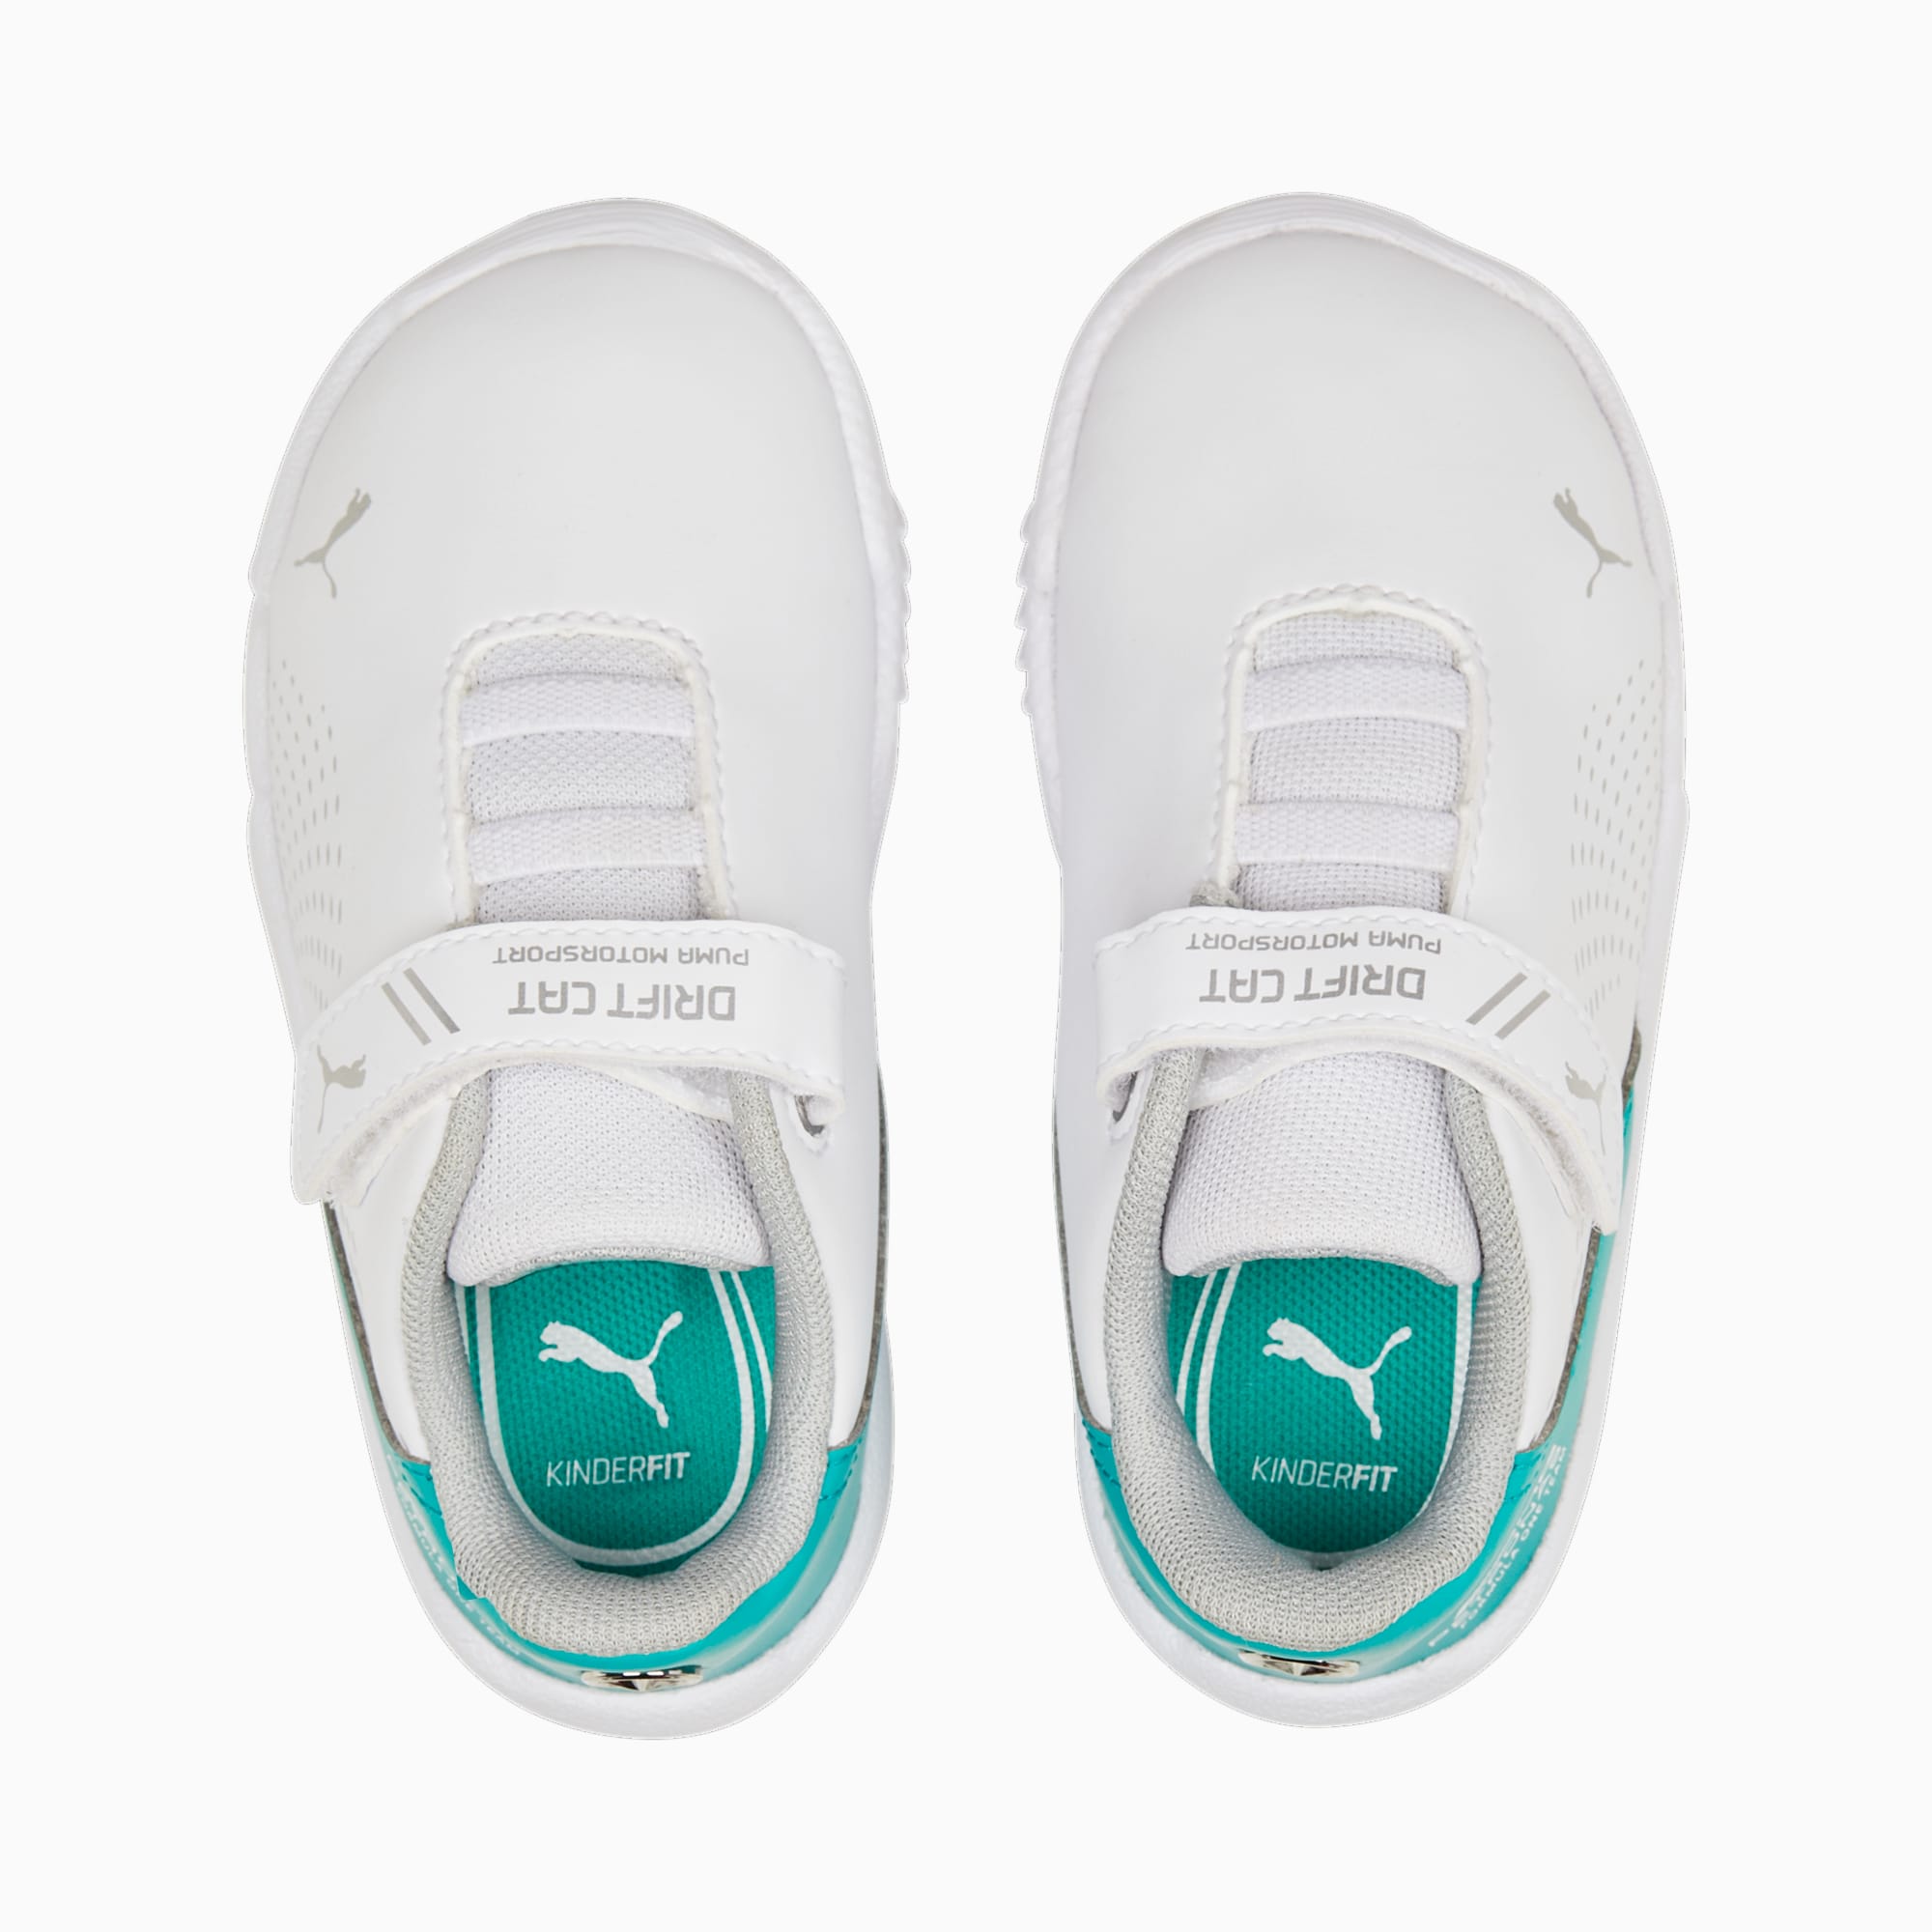 PUMA Mercedes-Amg Petronas Drift Cat Decima Toddlers' Motorsport Shoes, White/Spectra Green/Silver, Size 19, Shoes